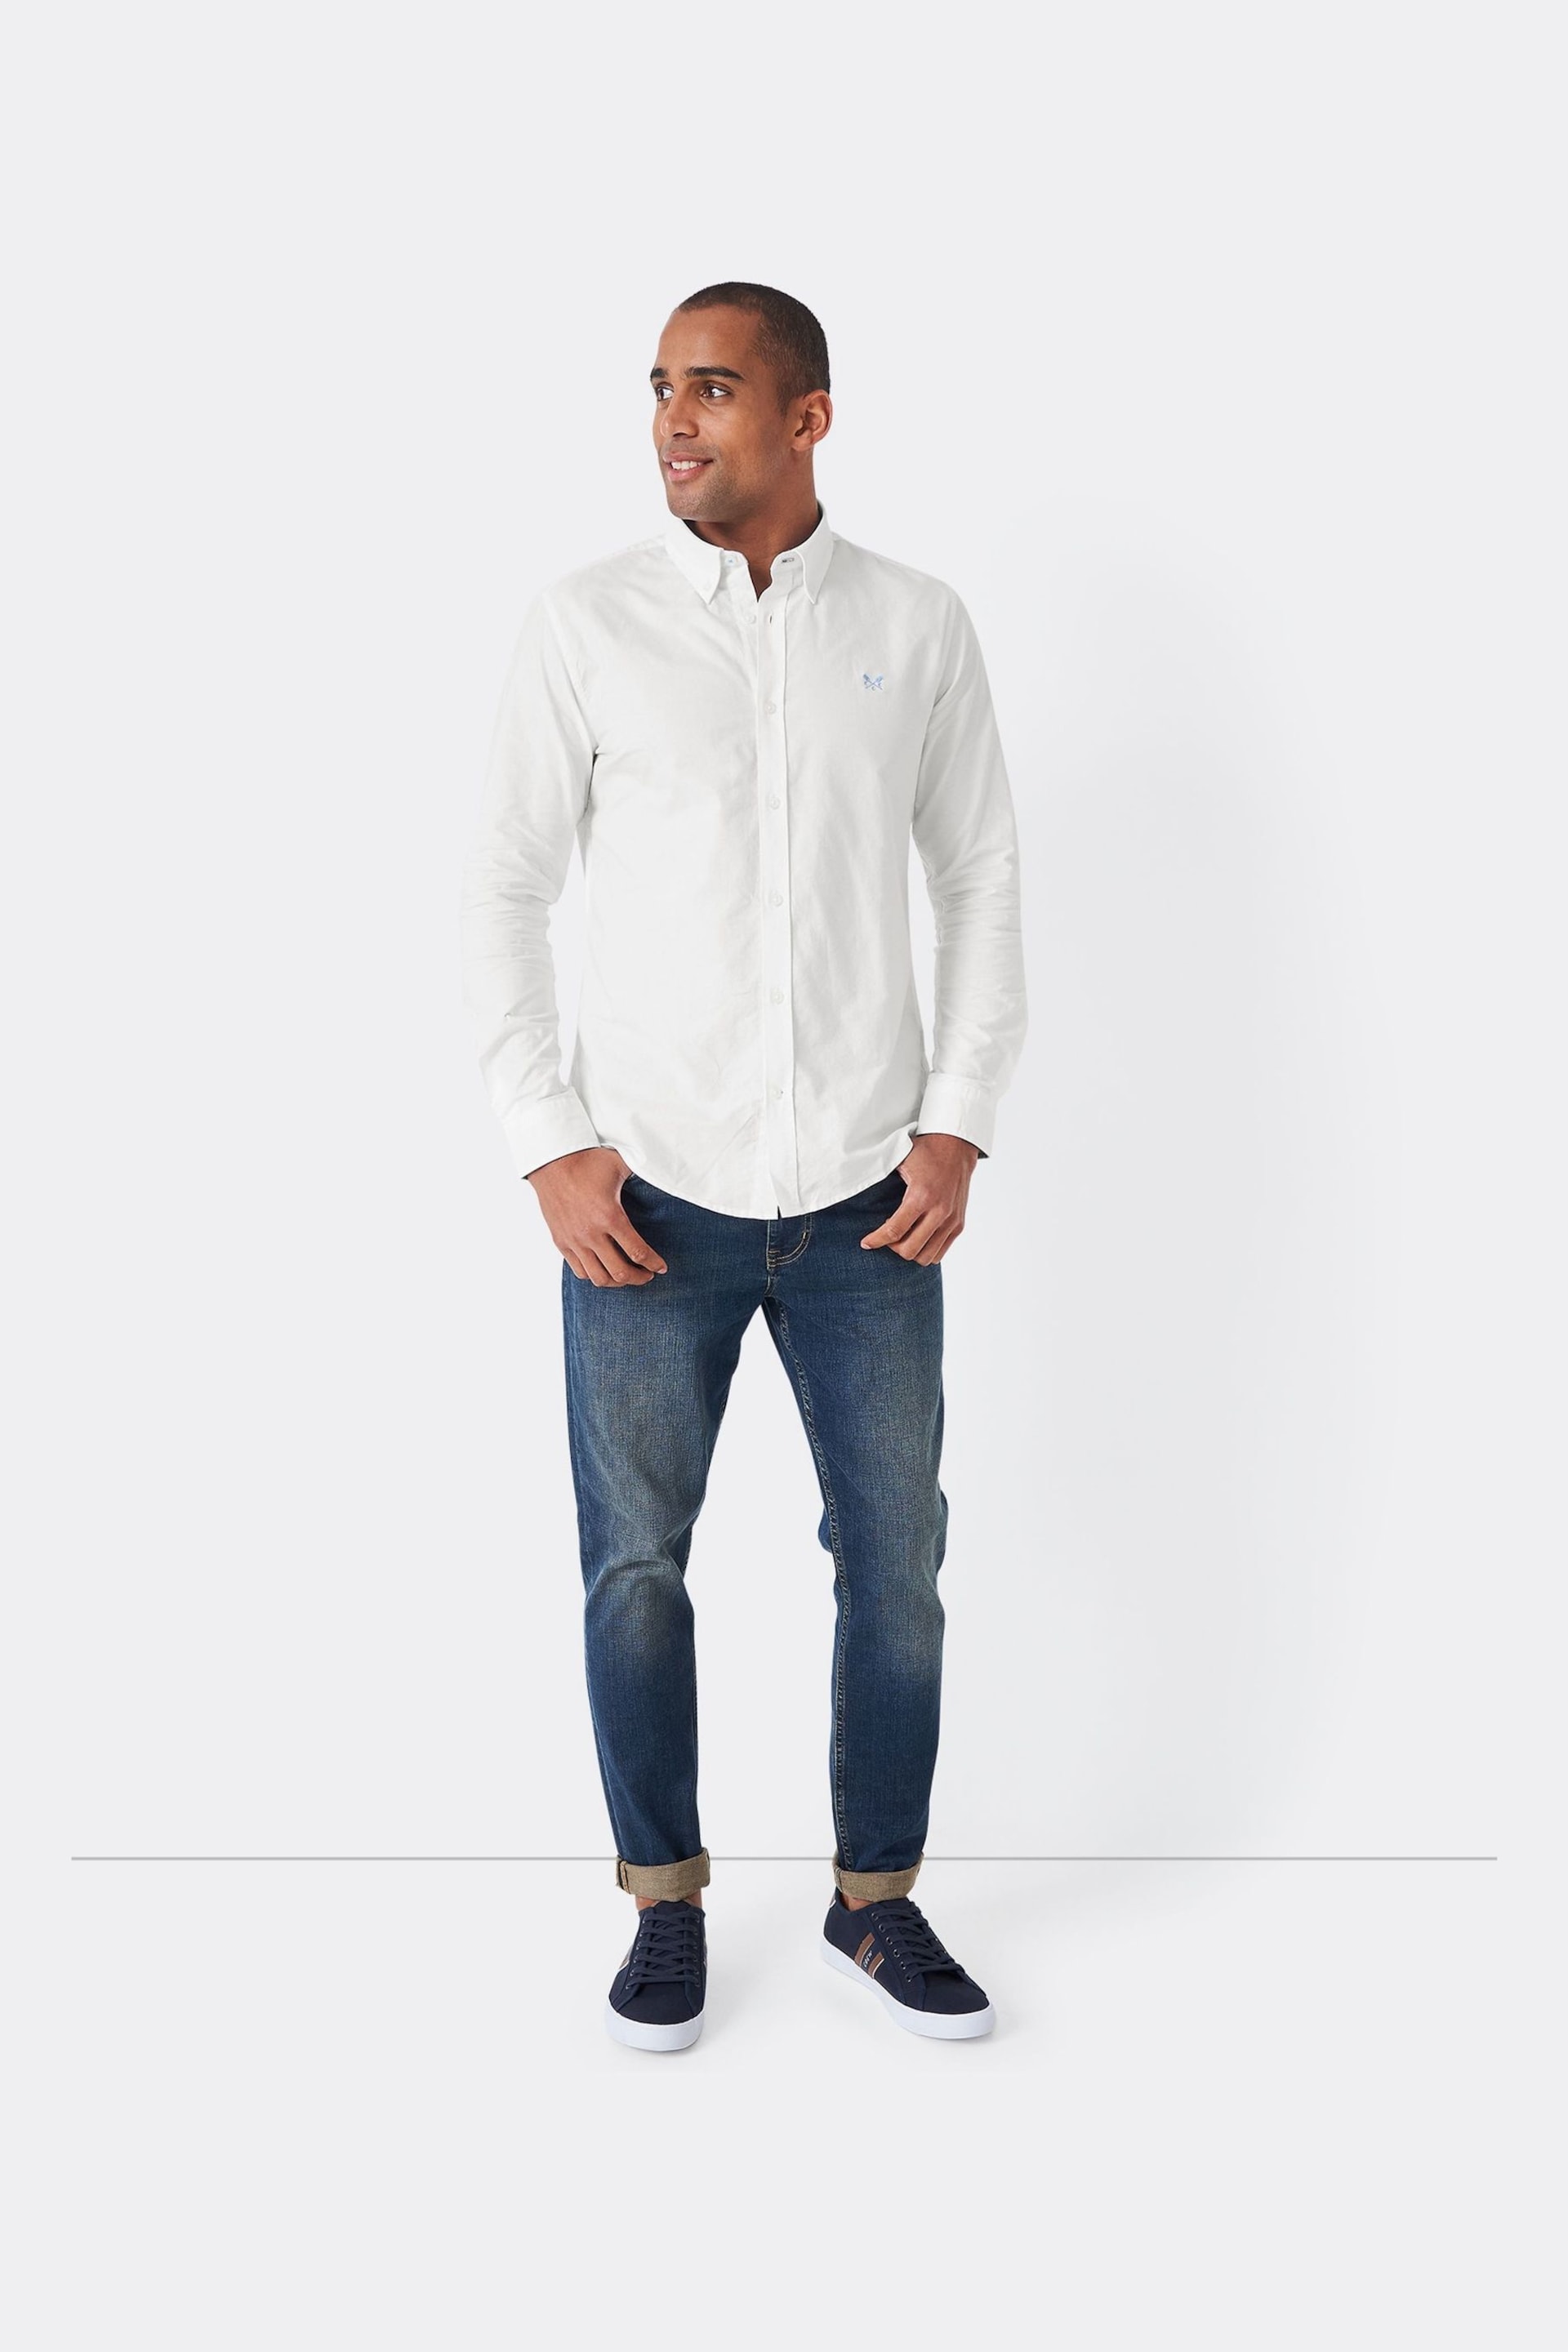 Crew Clothing Classic Fit Oxford Shirt - Image 3 of 4